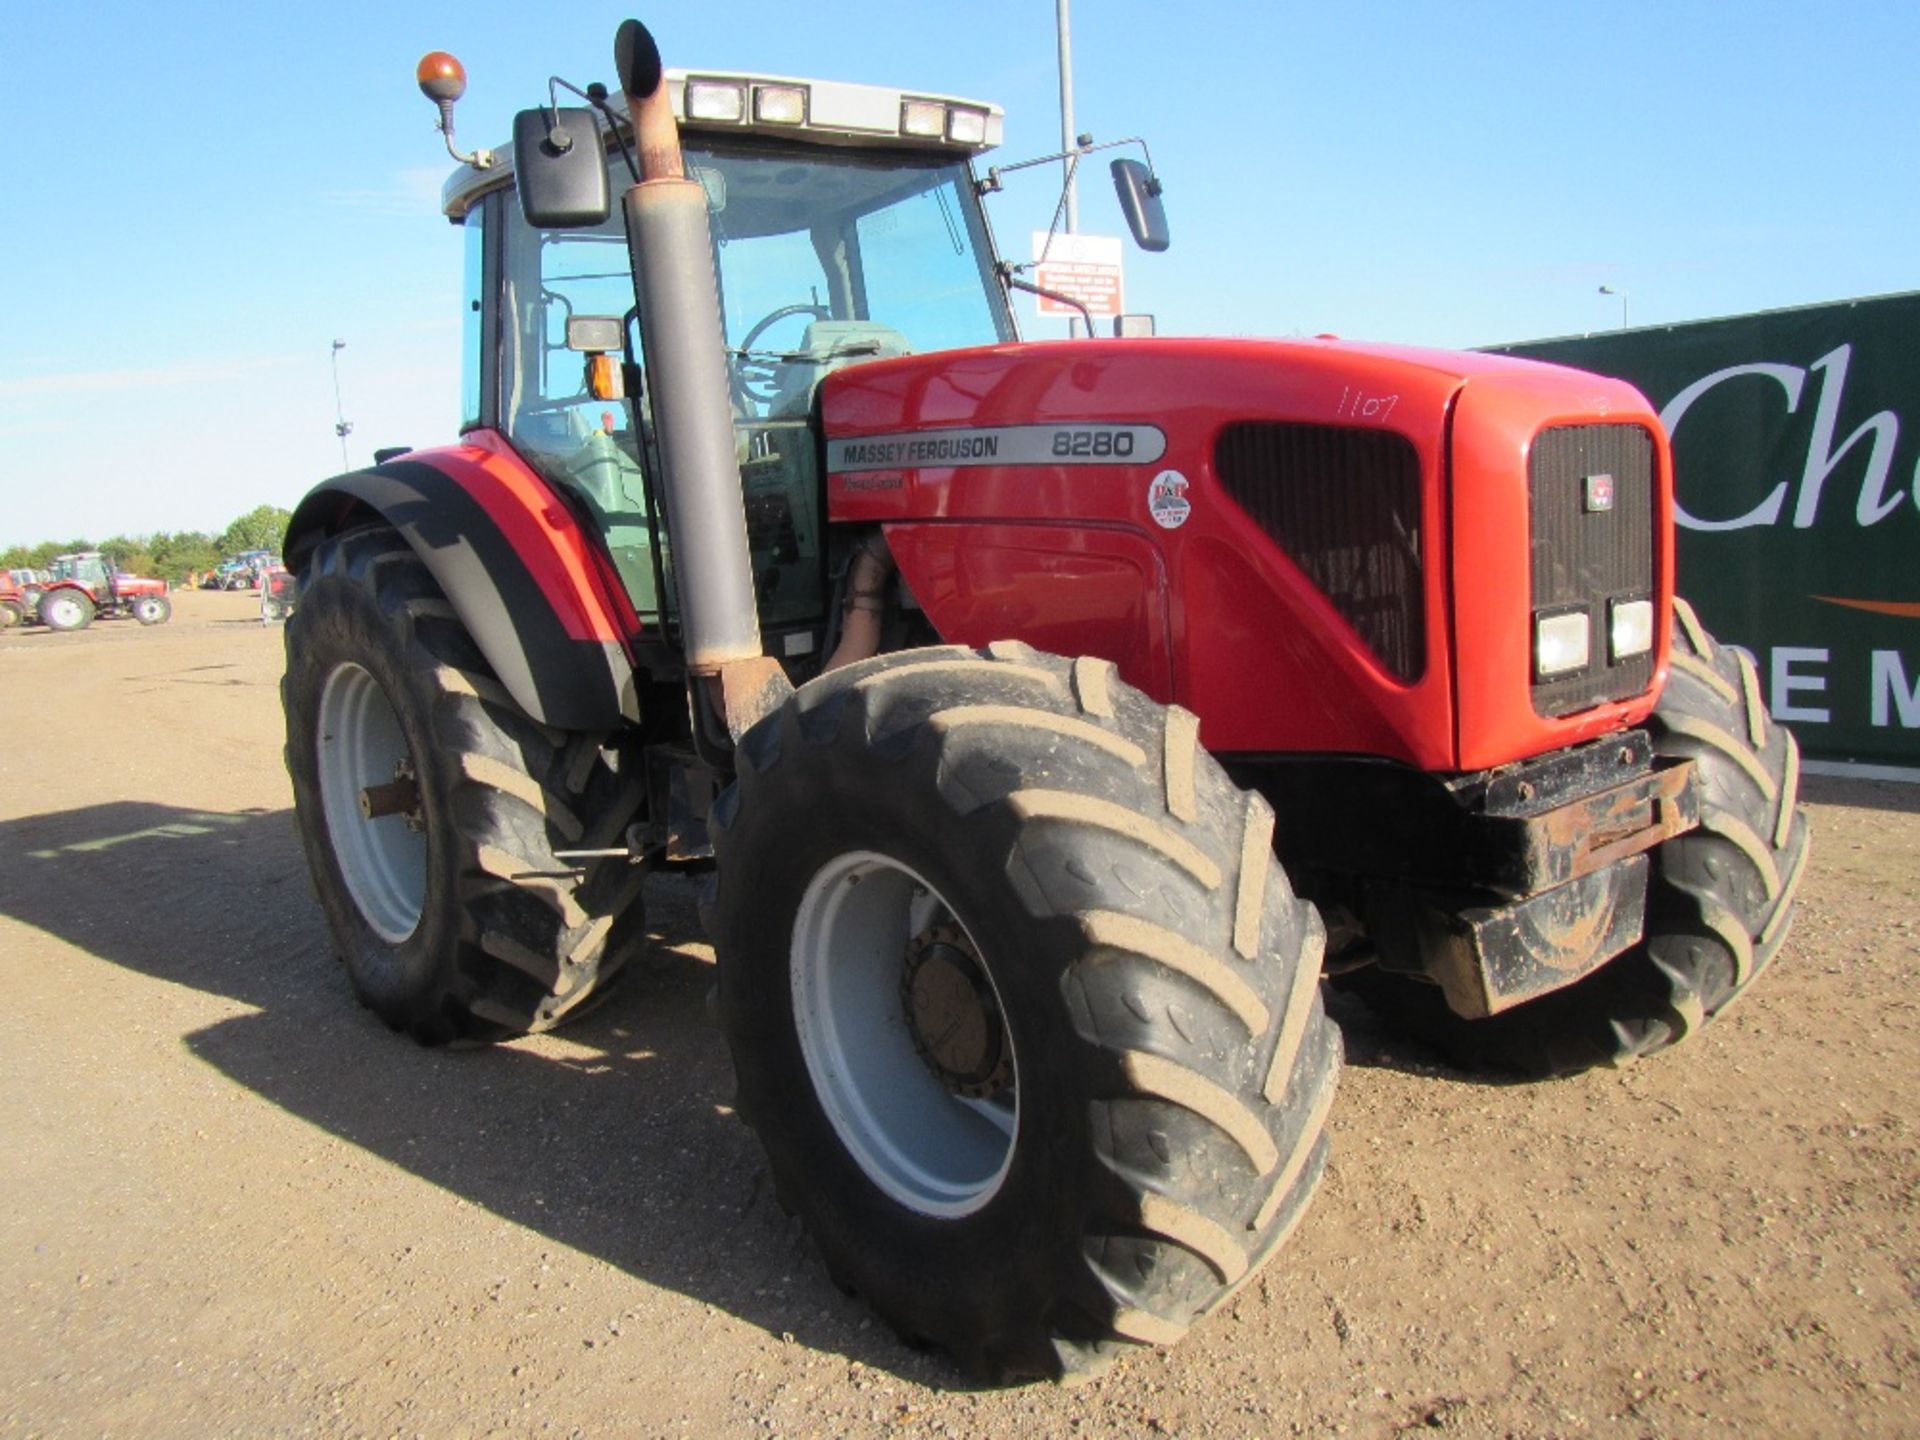 2001 Massey Ferguson 8280 Tractor with Air Con & Pick Up Hitch Reg No Y521 OJL Ser No K179035 - Image 3 of 16